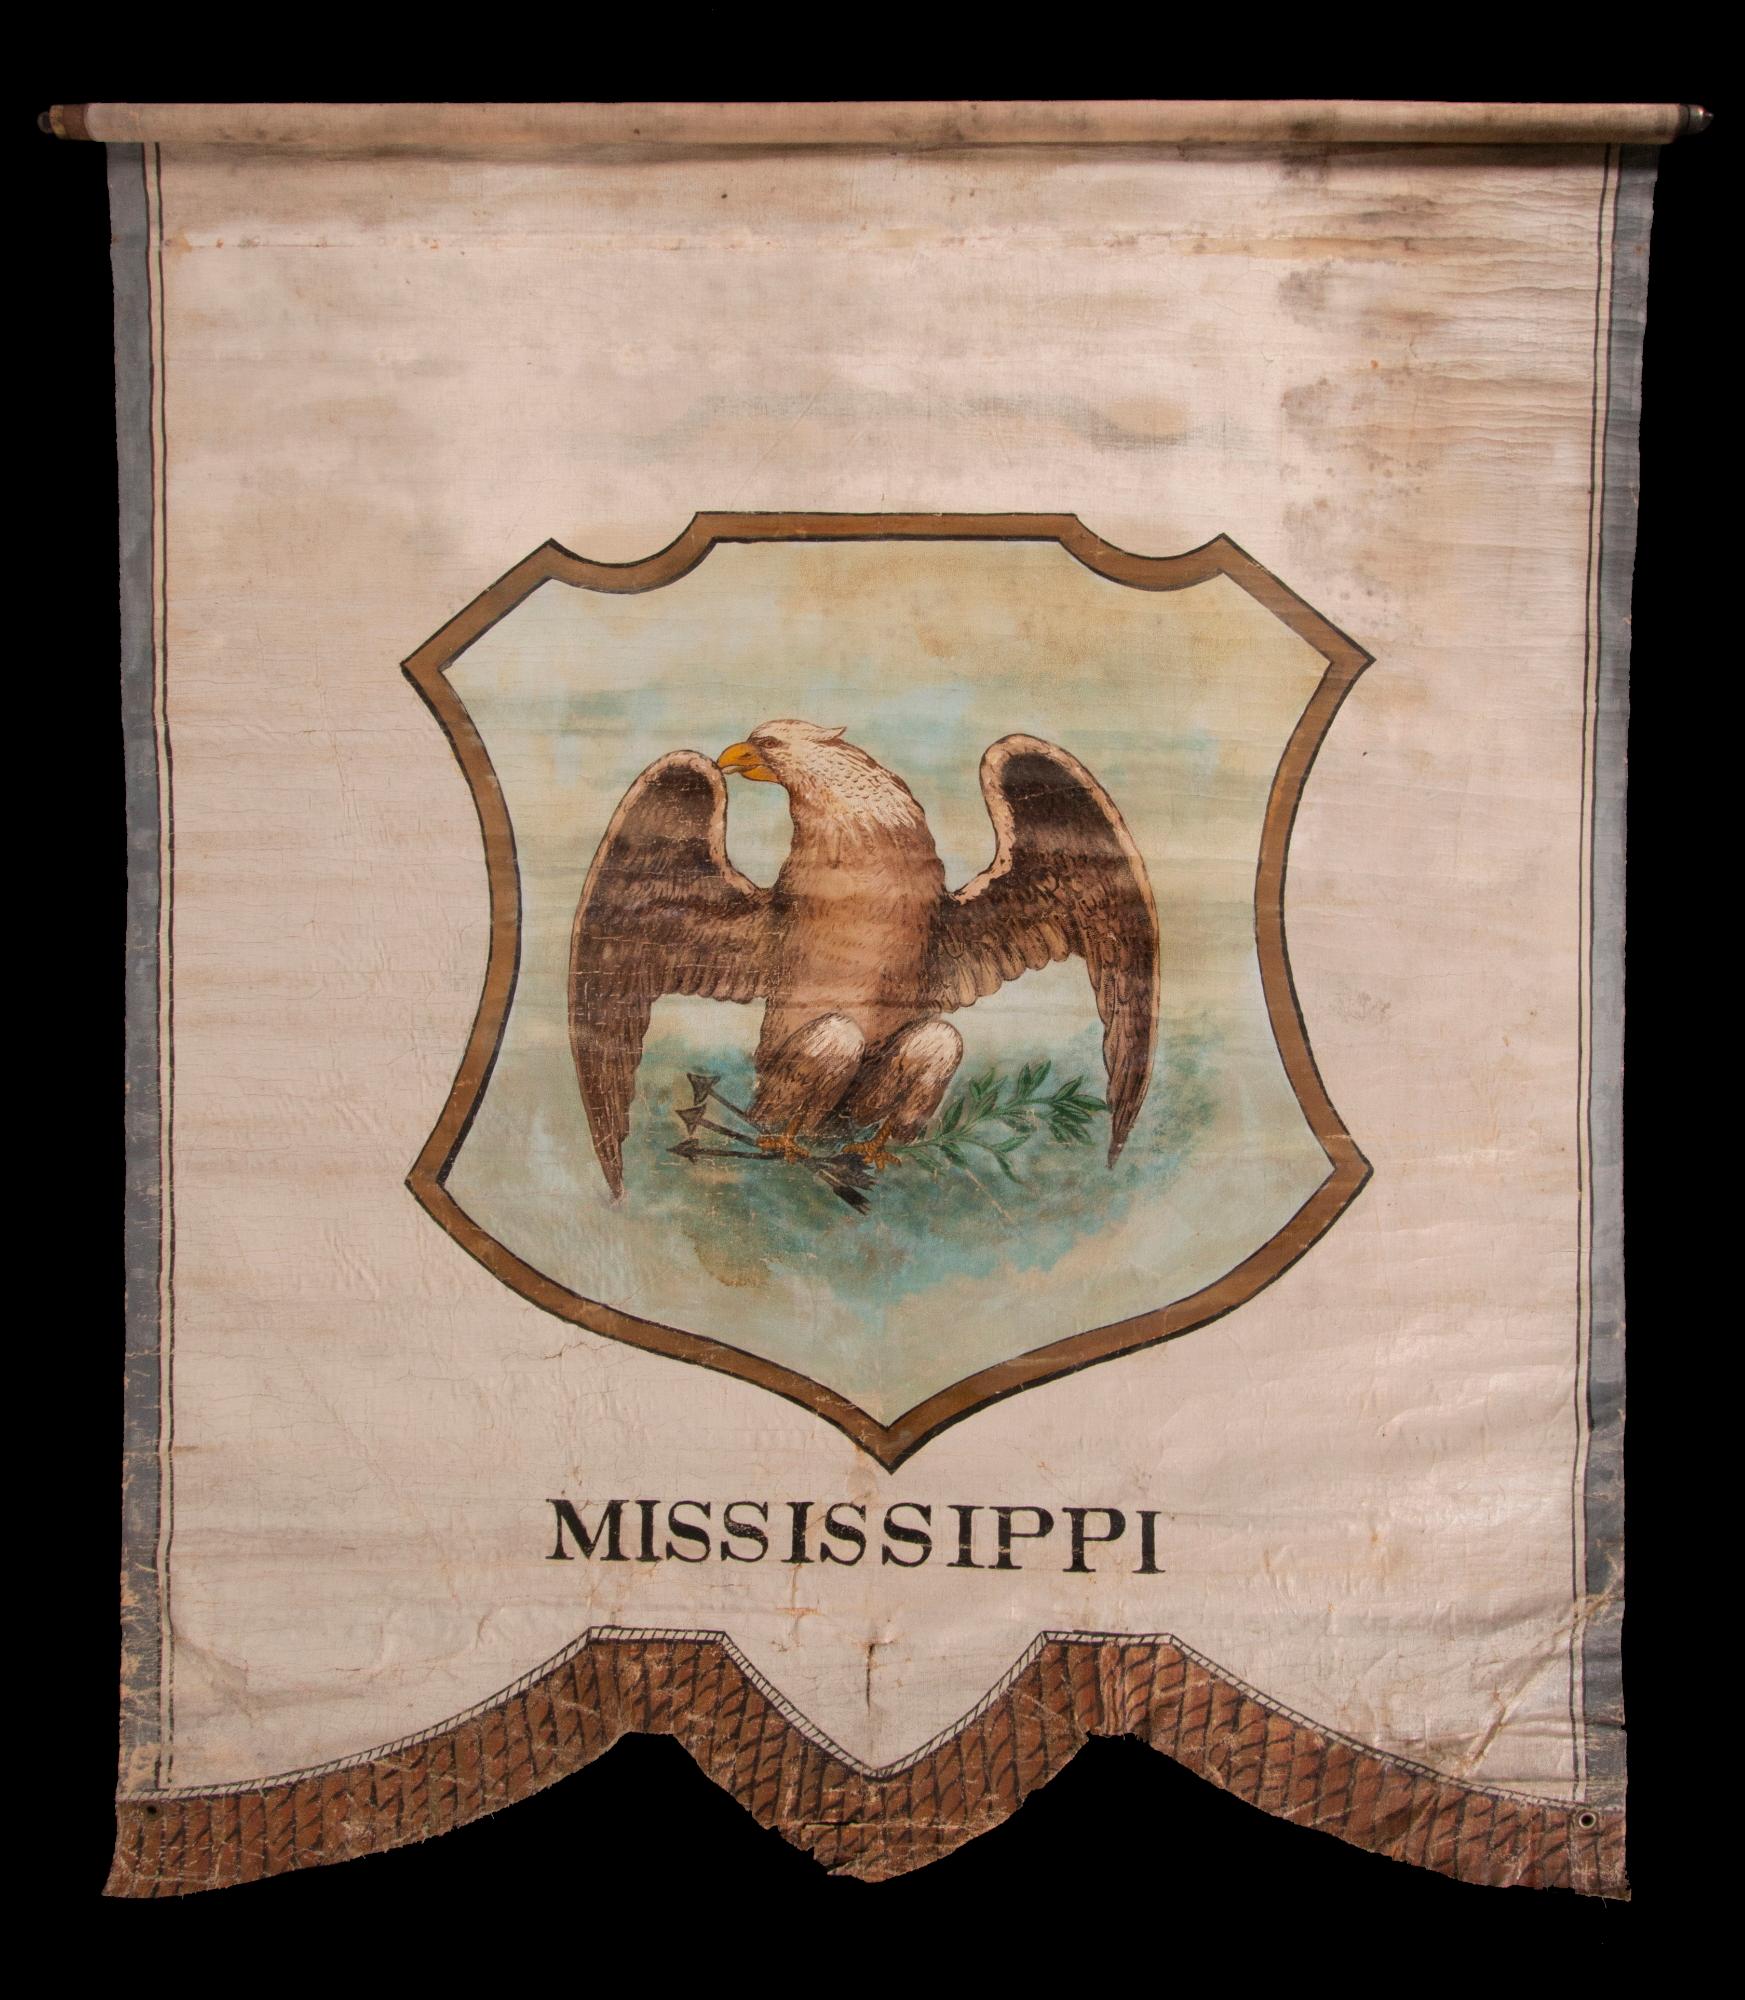 Unique, hand-painted banner with the seal of the state of mississippi, likely having represented delegates from that state at the 1872 republican or democrat national convention [similar examples identified at both]

Banner with the seal of the